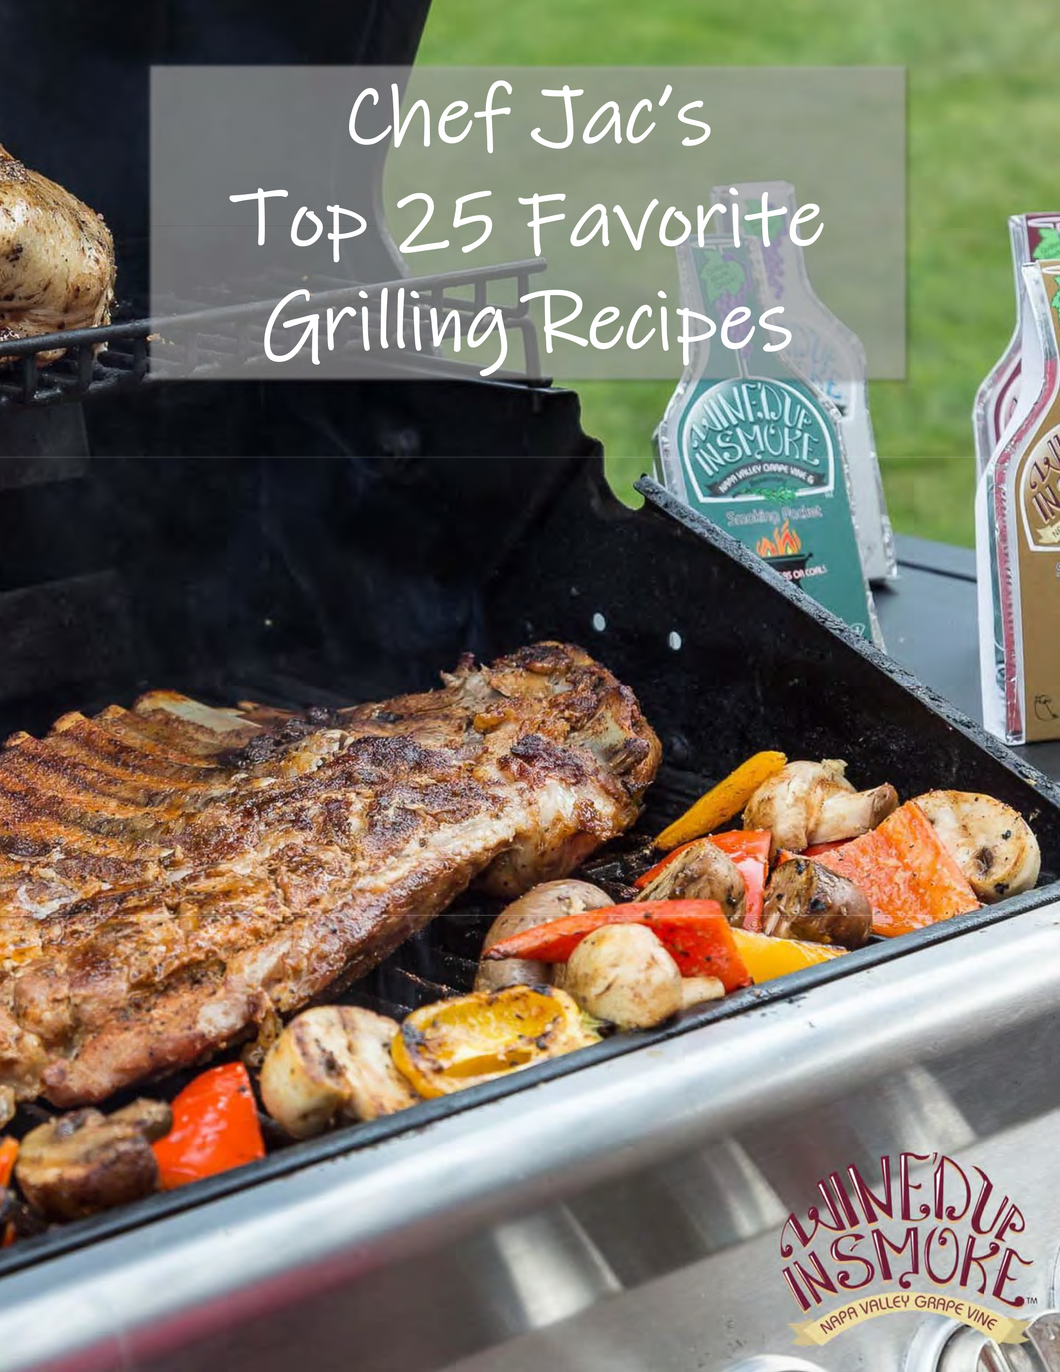 Chef Jac's Top 25 Favorite Grilling Recipes